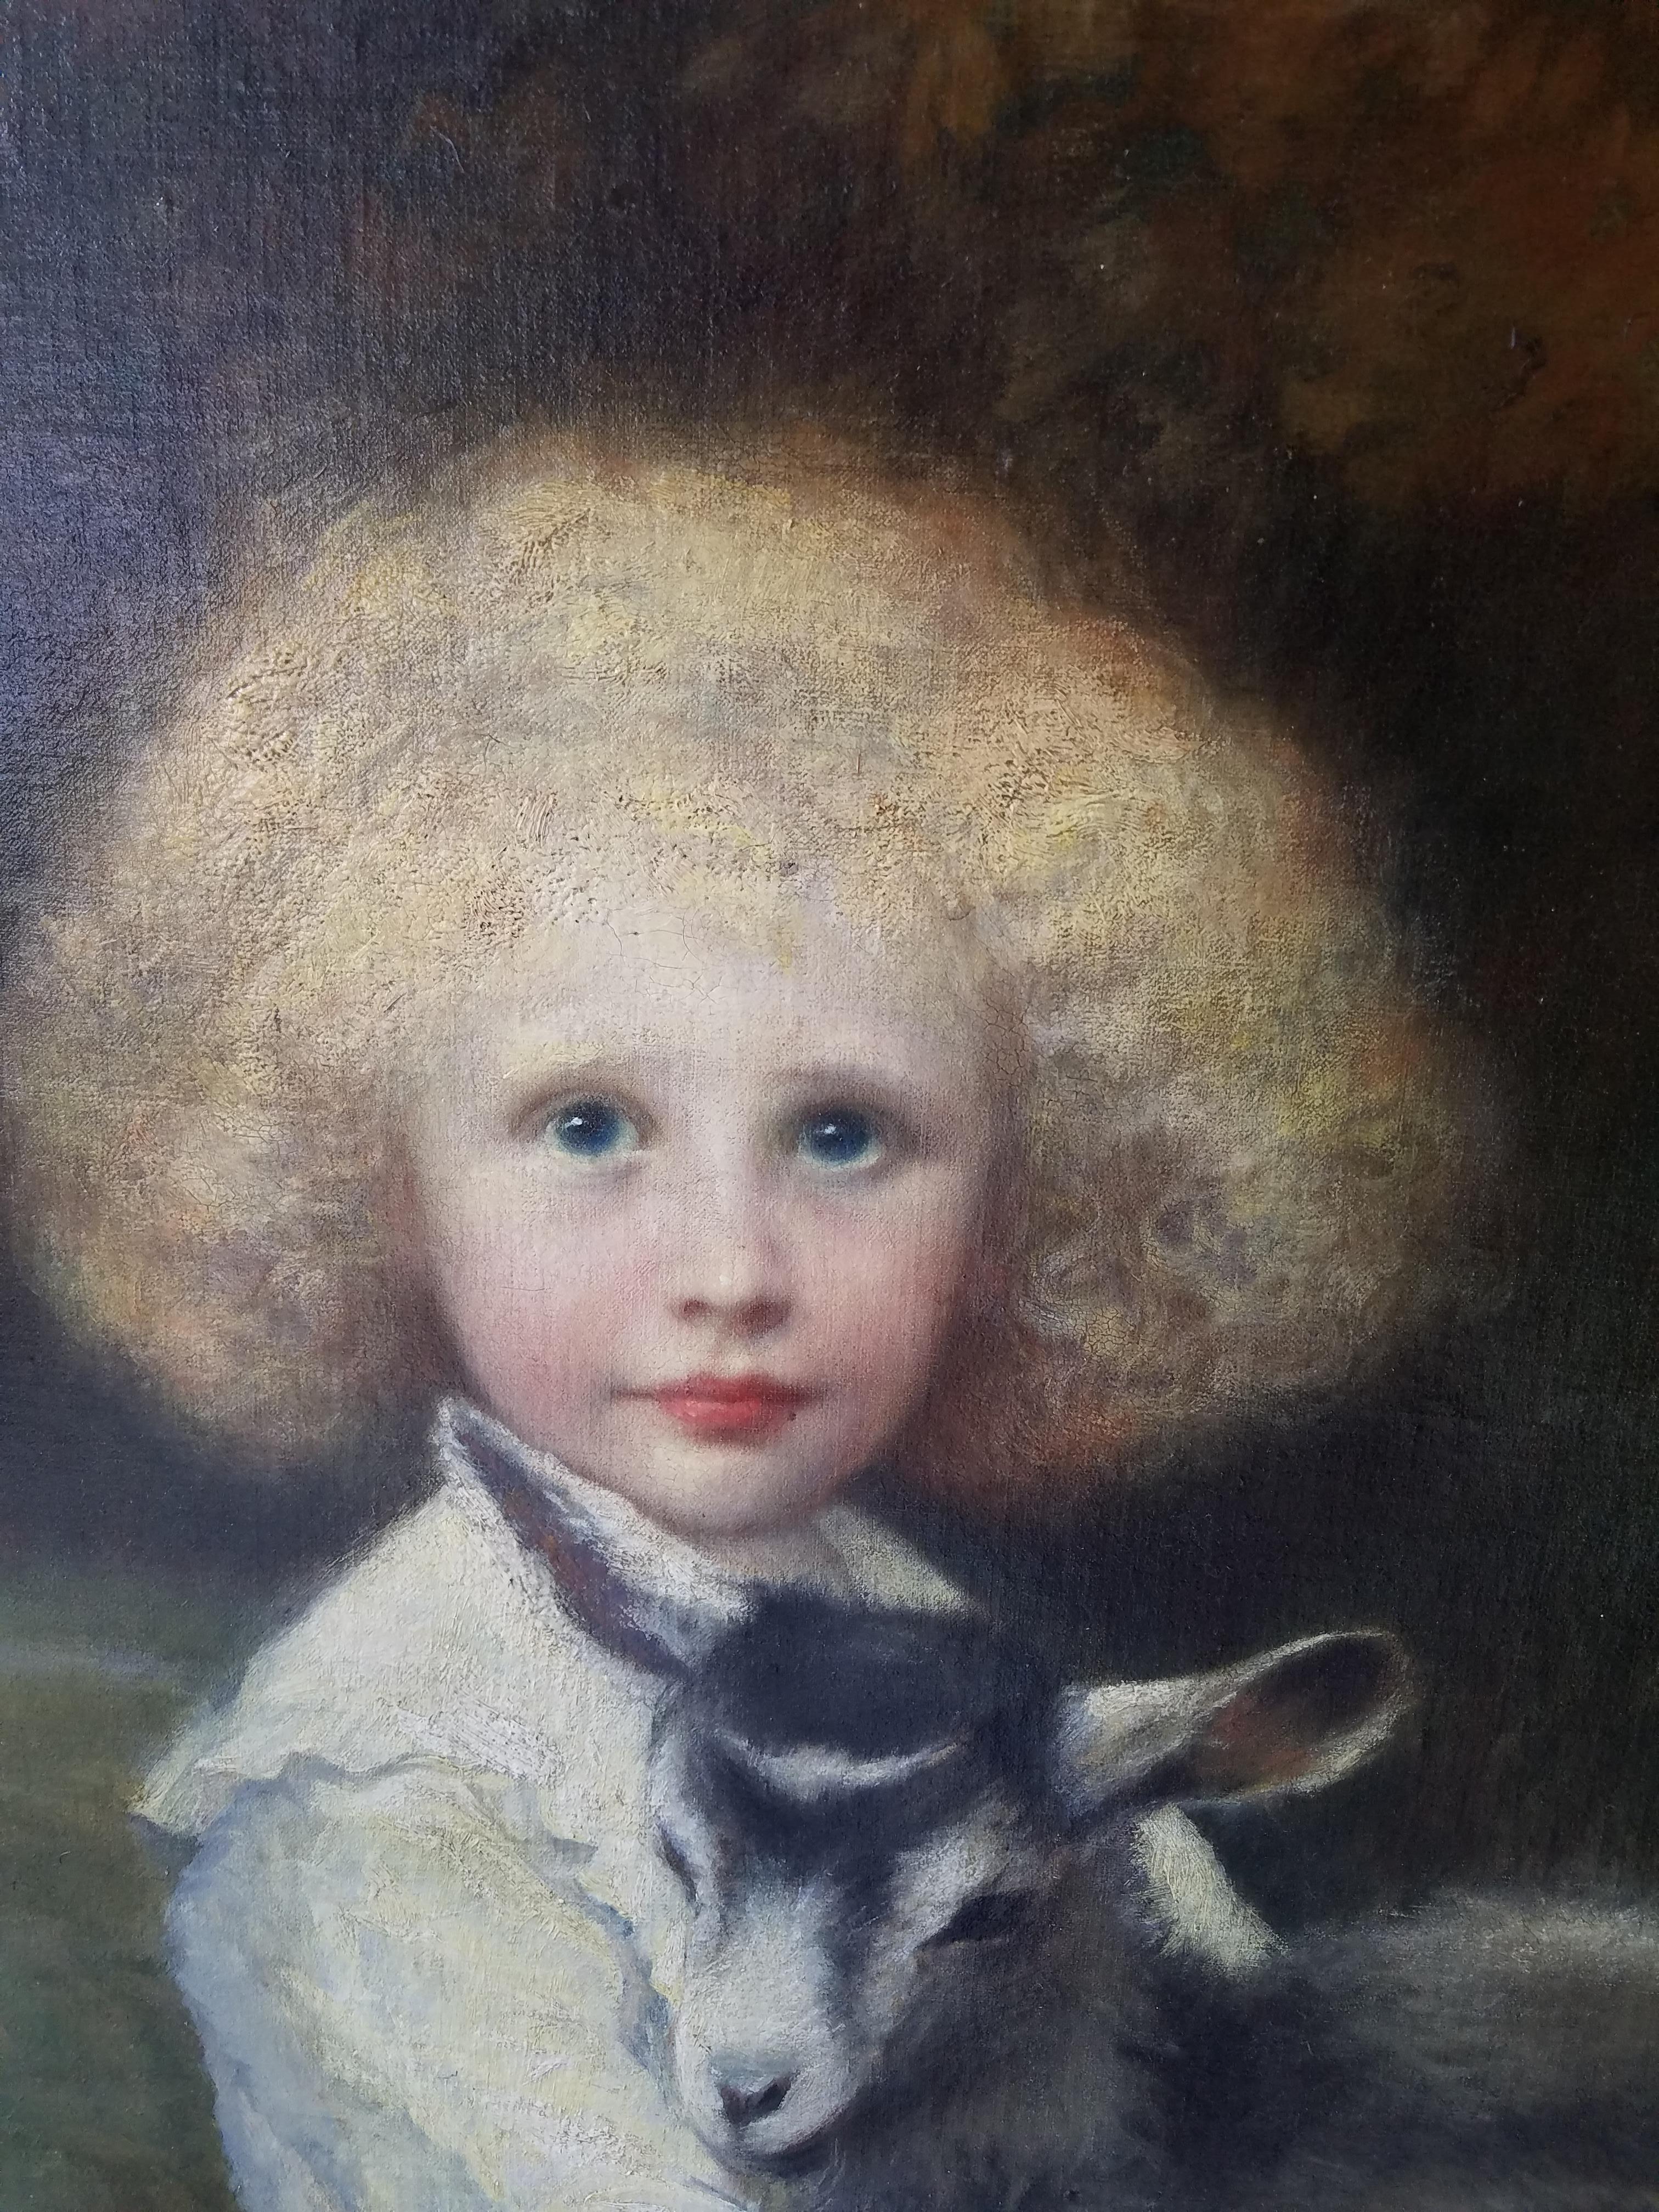 Late Victorian 19th Century French Painting of an Aristocratic Young Boy with His Pet Goat